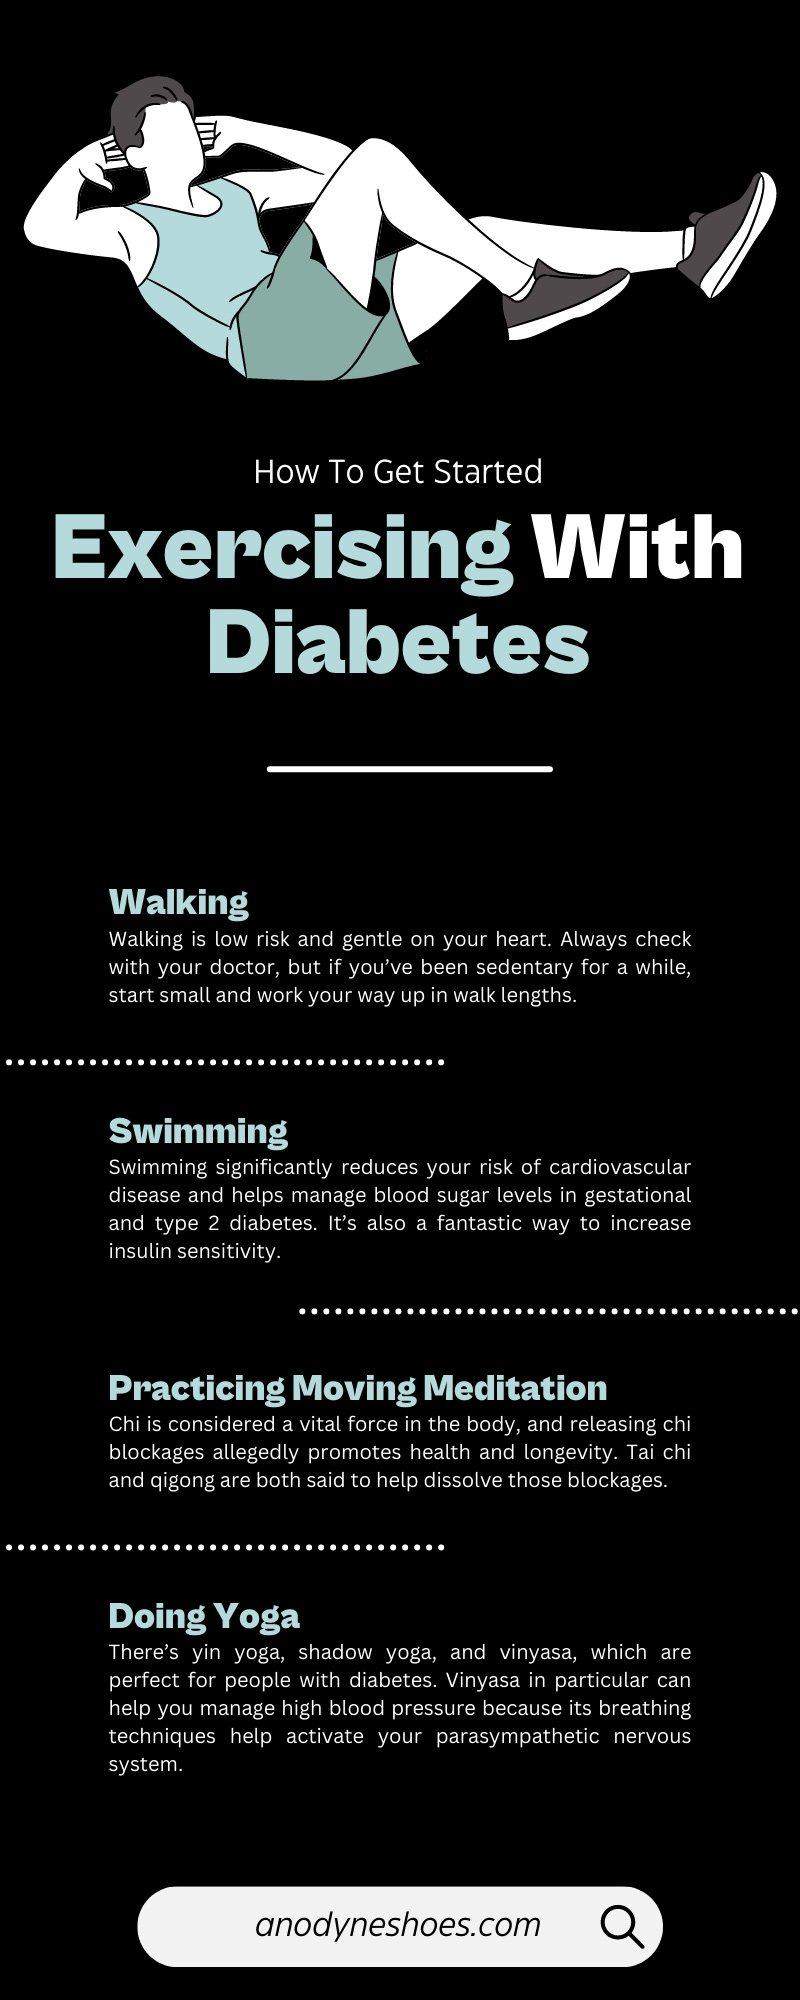 How To Get Started Exercising With Diabetes